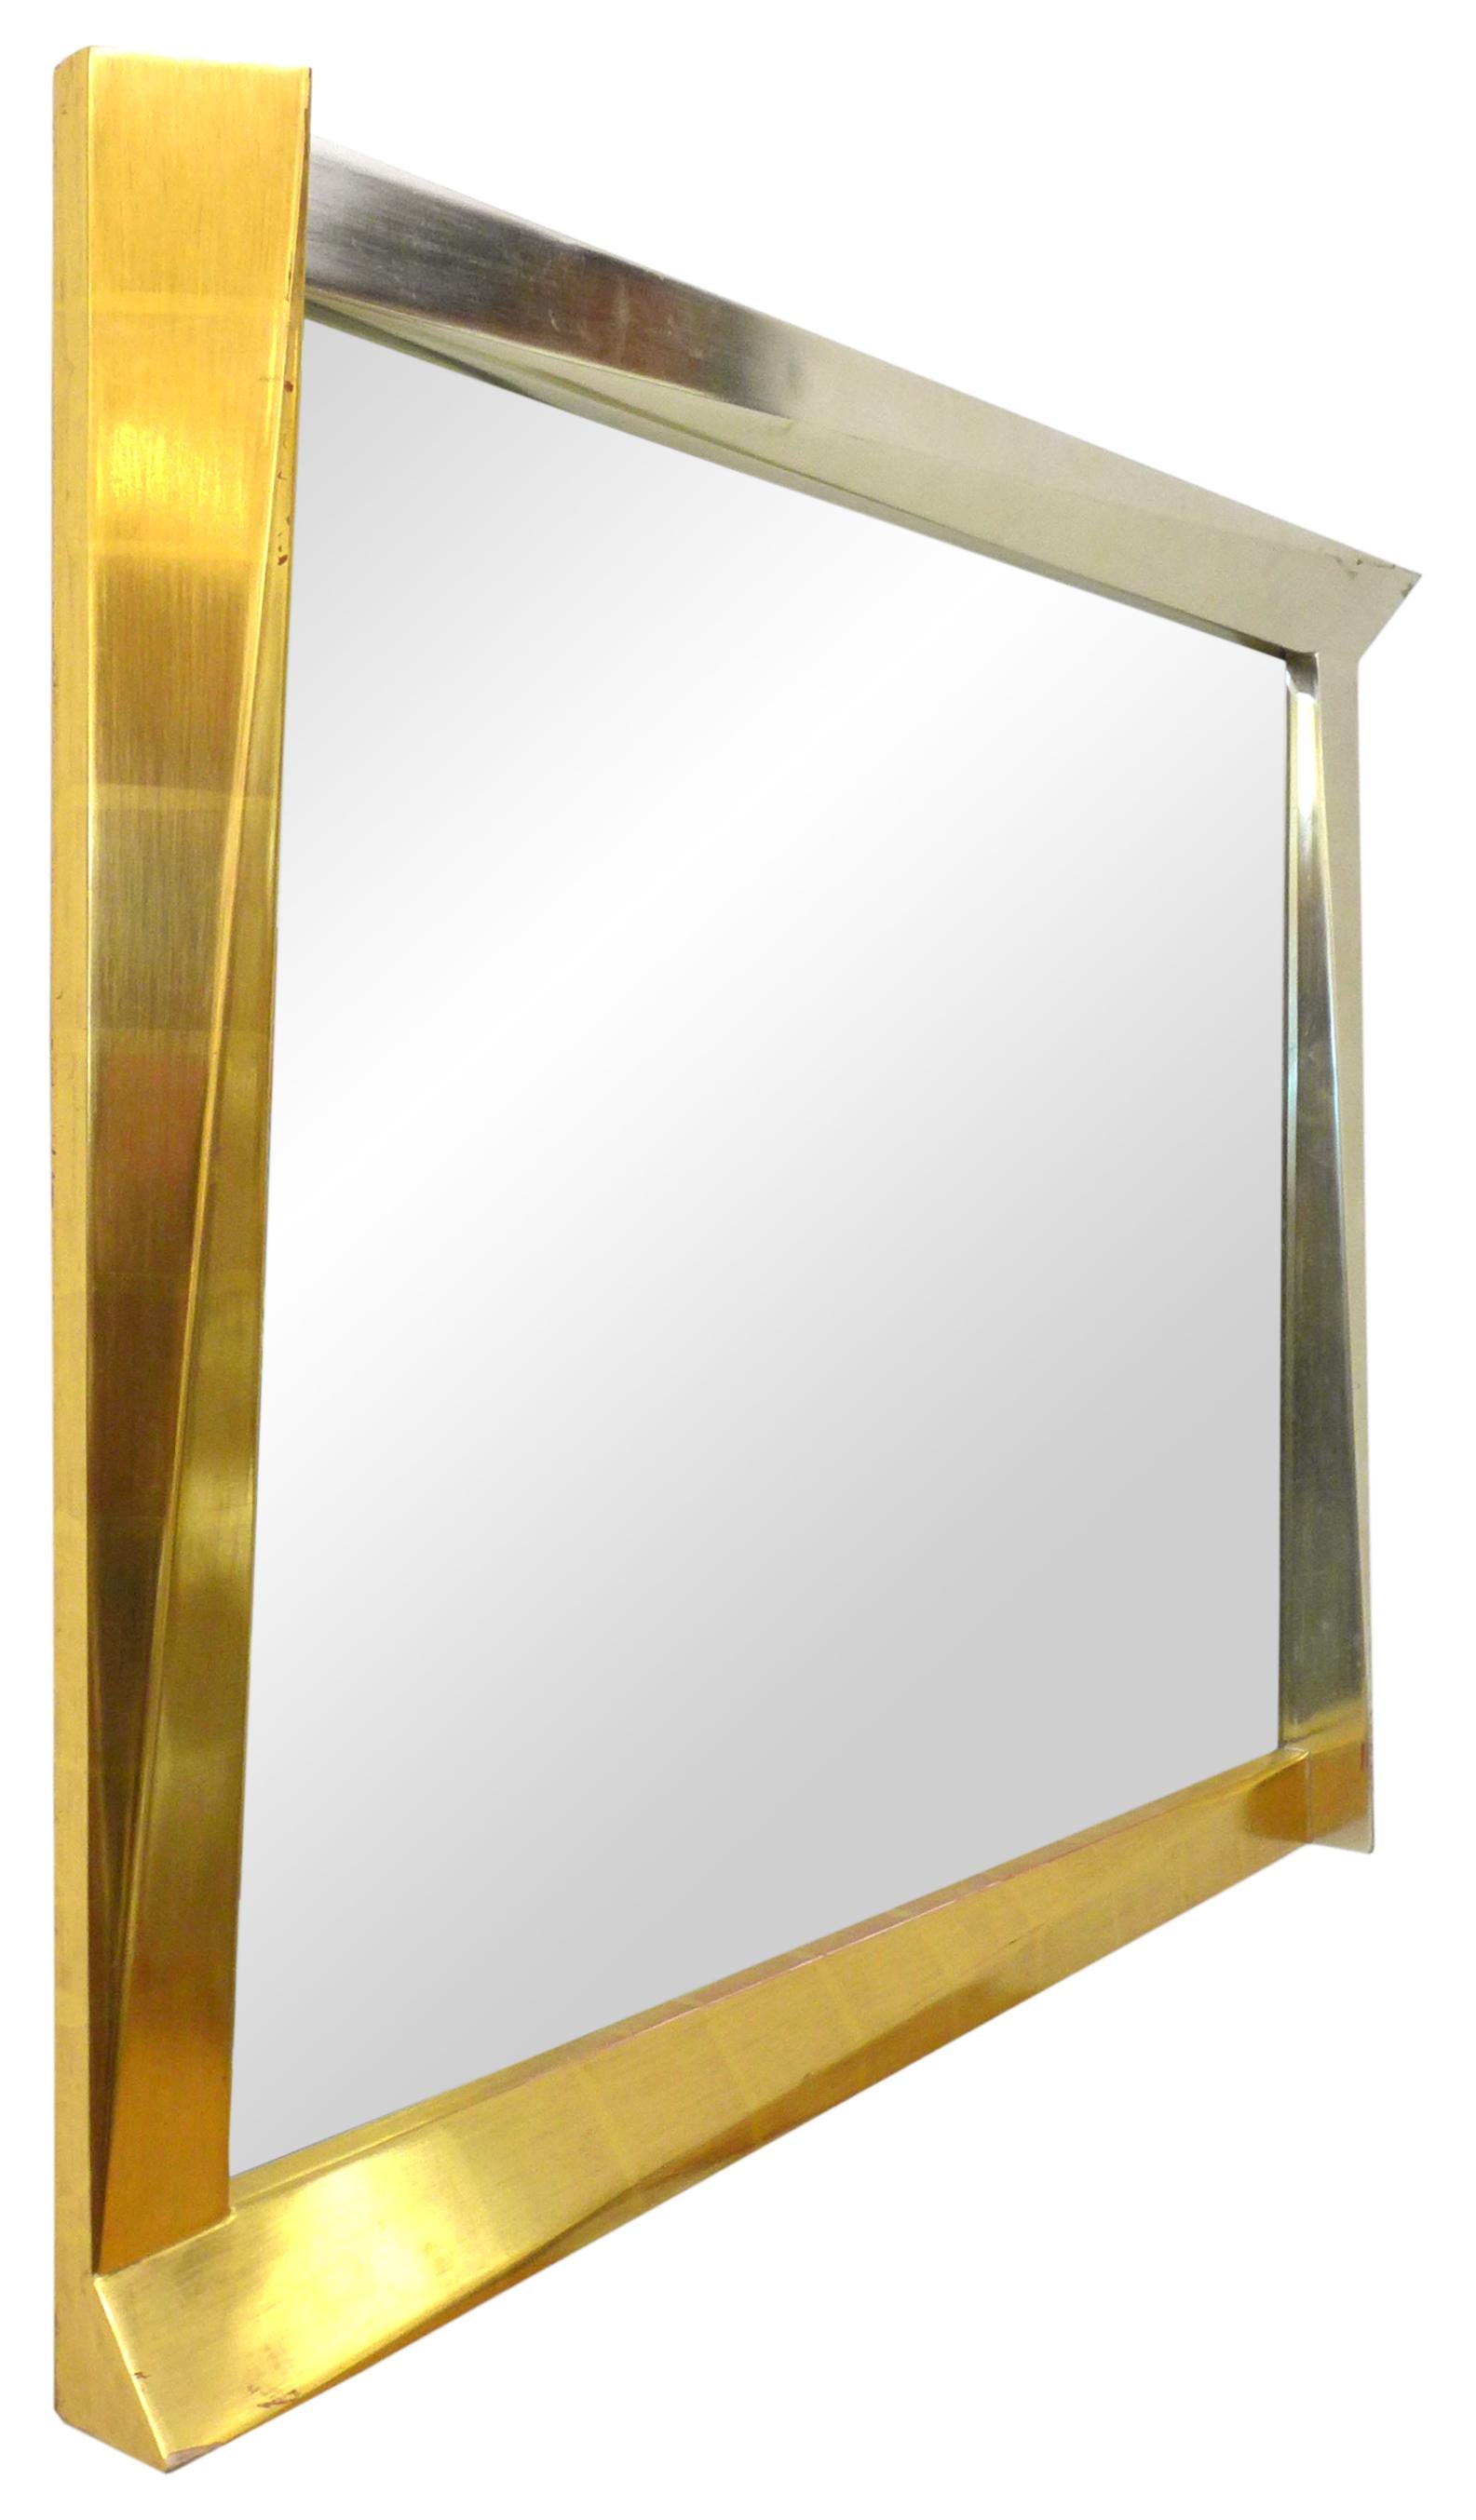 A fantastic, cubist, giltwood-framed mirror. A wonderful, optically-alluring geometric frame playfully jutting out of its expected space at various angles; adding to the illusion, a subtle gold gradient change diagonally across its entirety. Chic